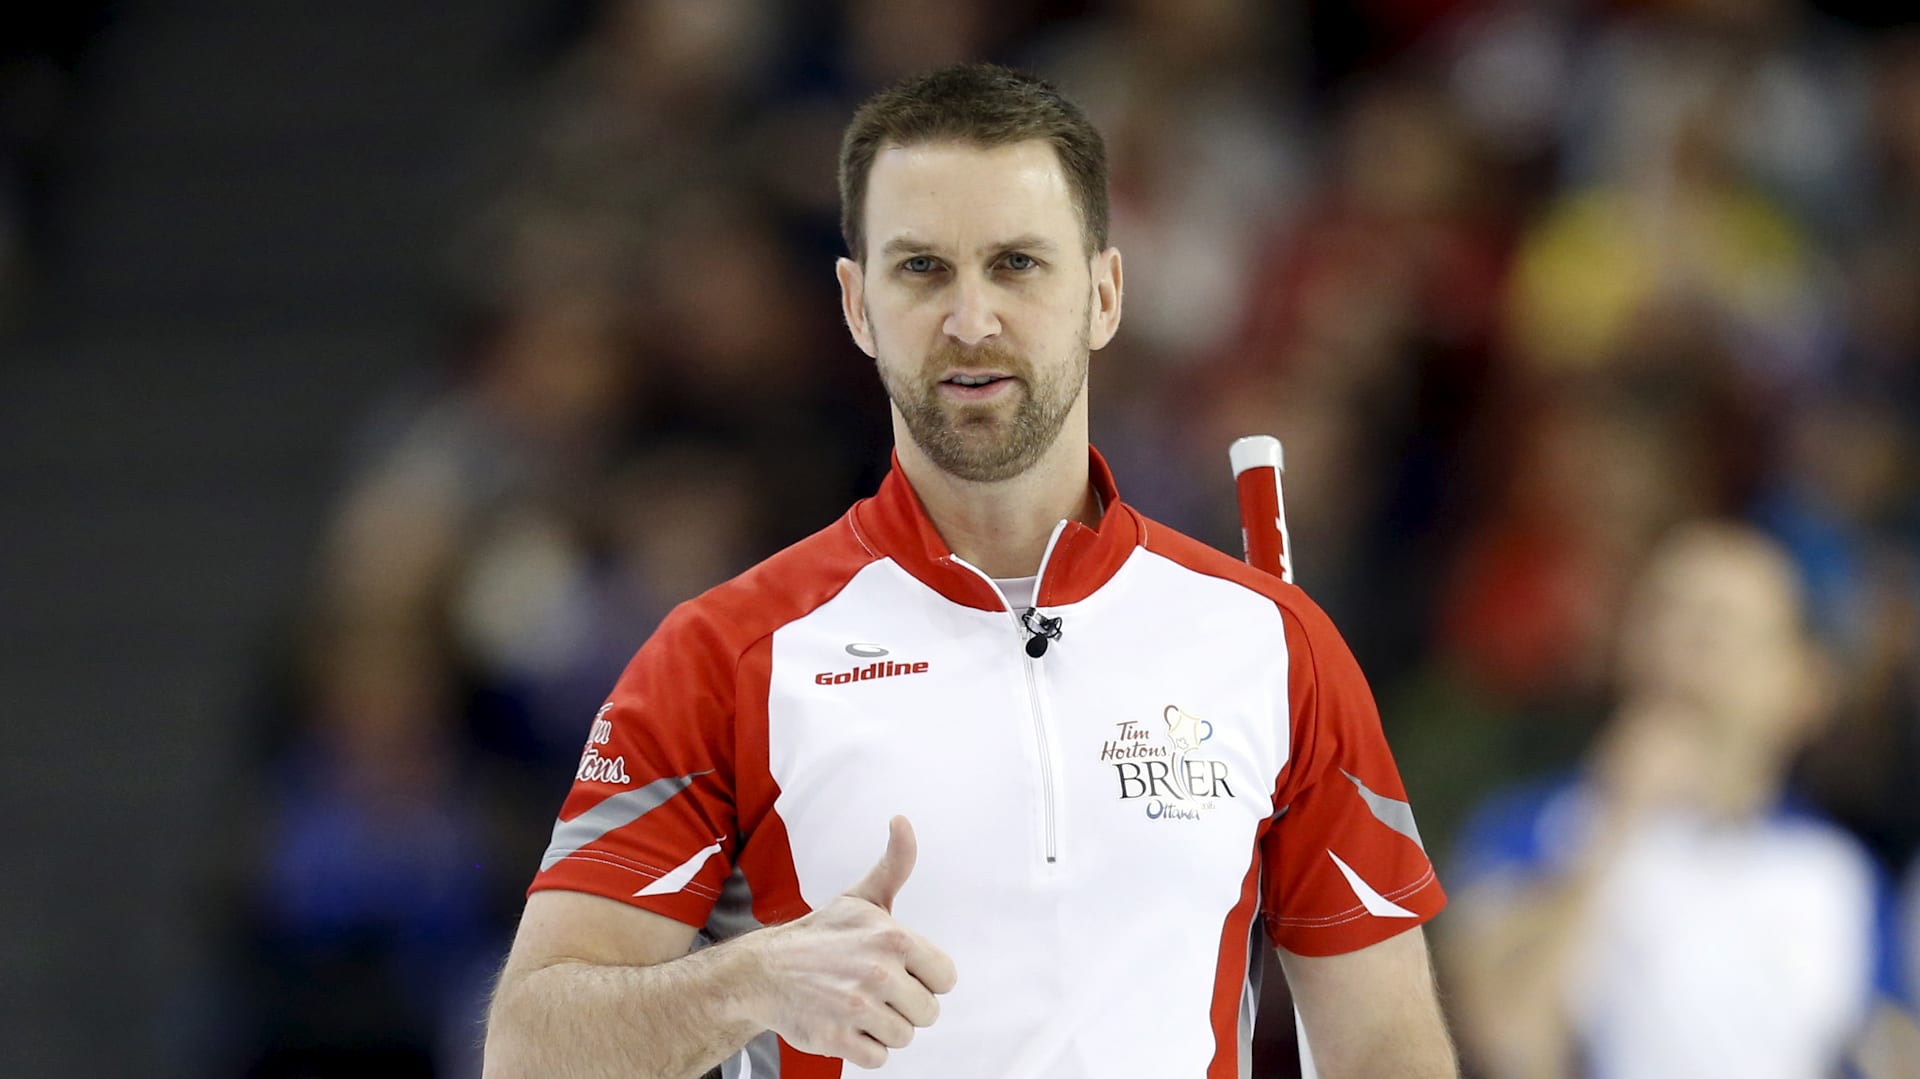 Brad Gushue skips Canada Olympic curling team 16 years after 2006 gold